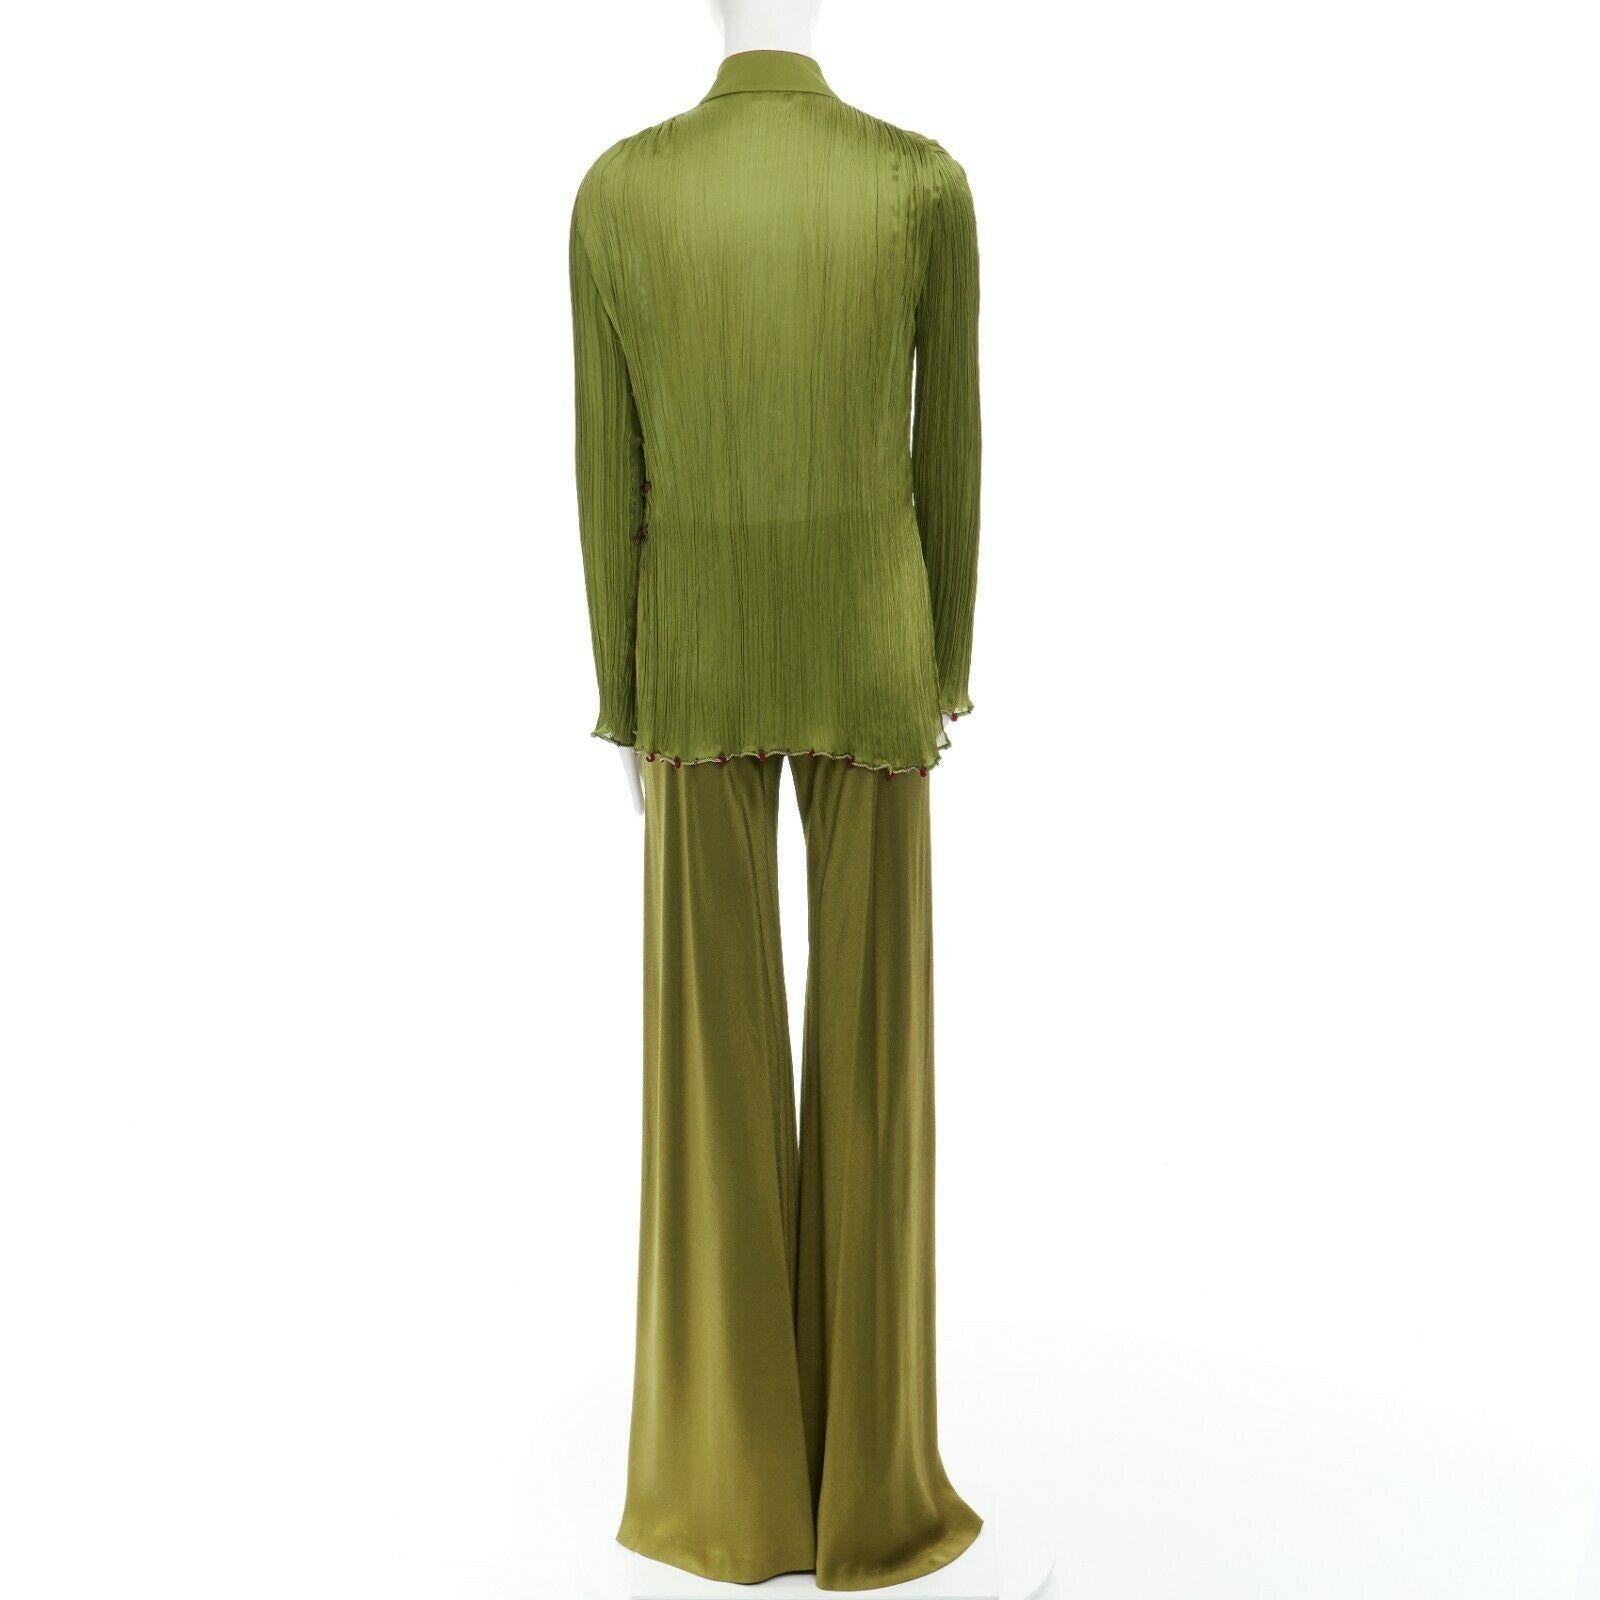 Brown CHRISTIAN DIOR GALLIANO SS99 Mao green beaded pleated silk pant suit FR38 M